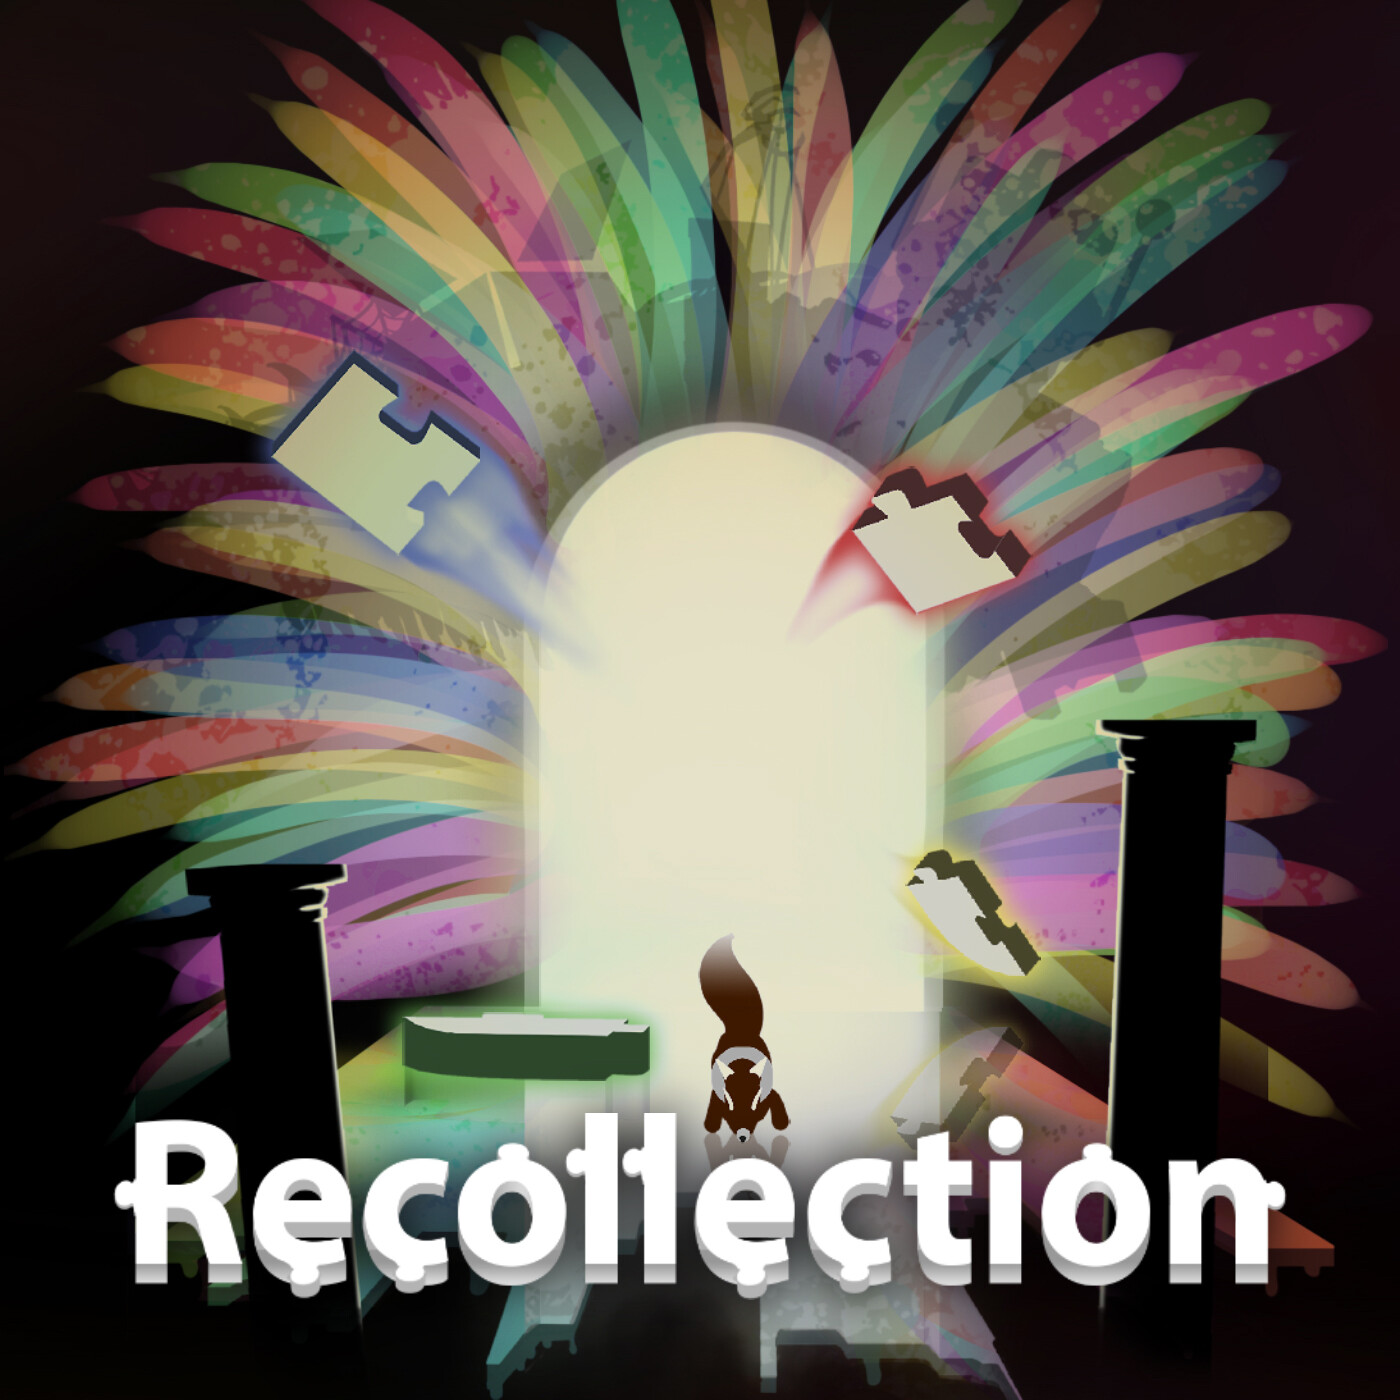 ArtStation - Recollection - Cover art 2